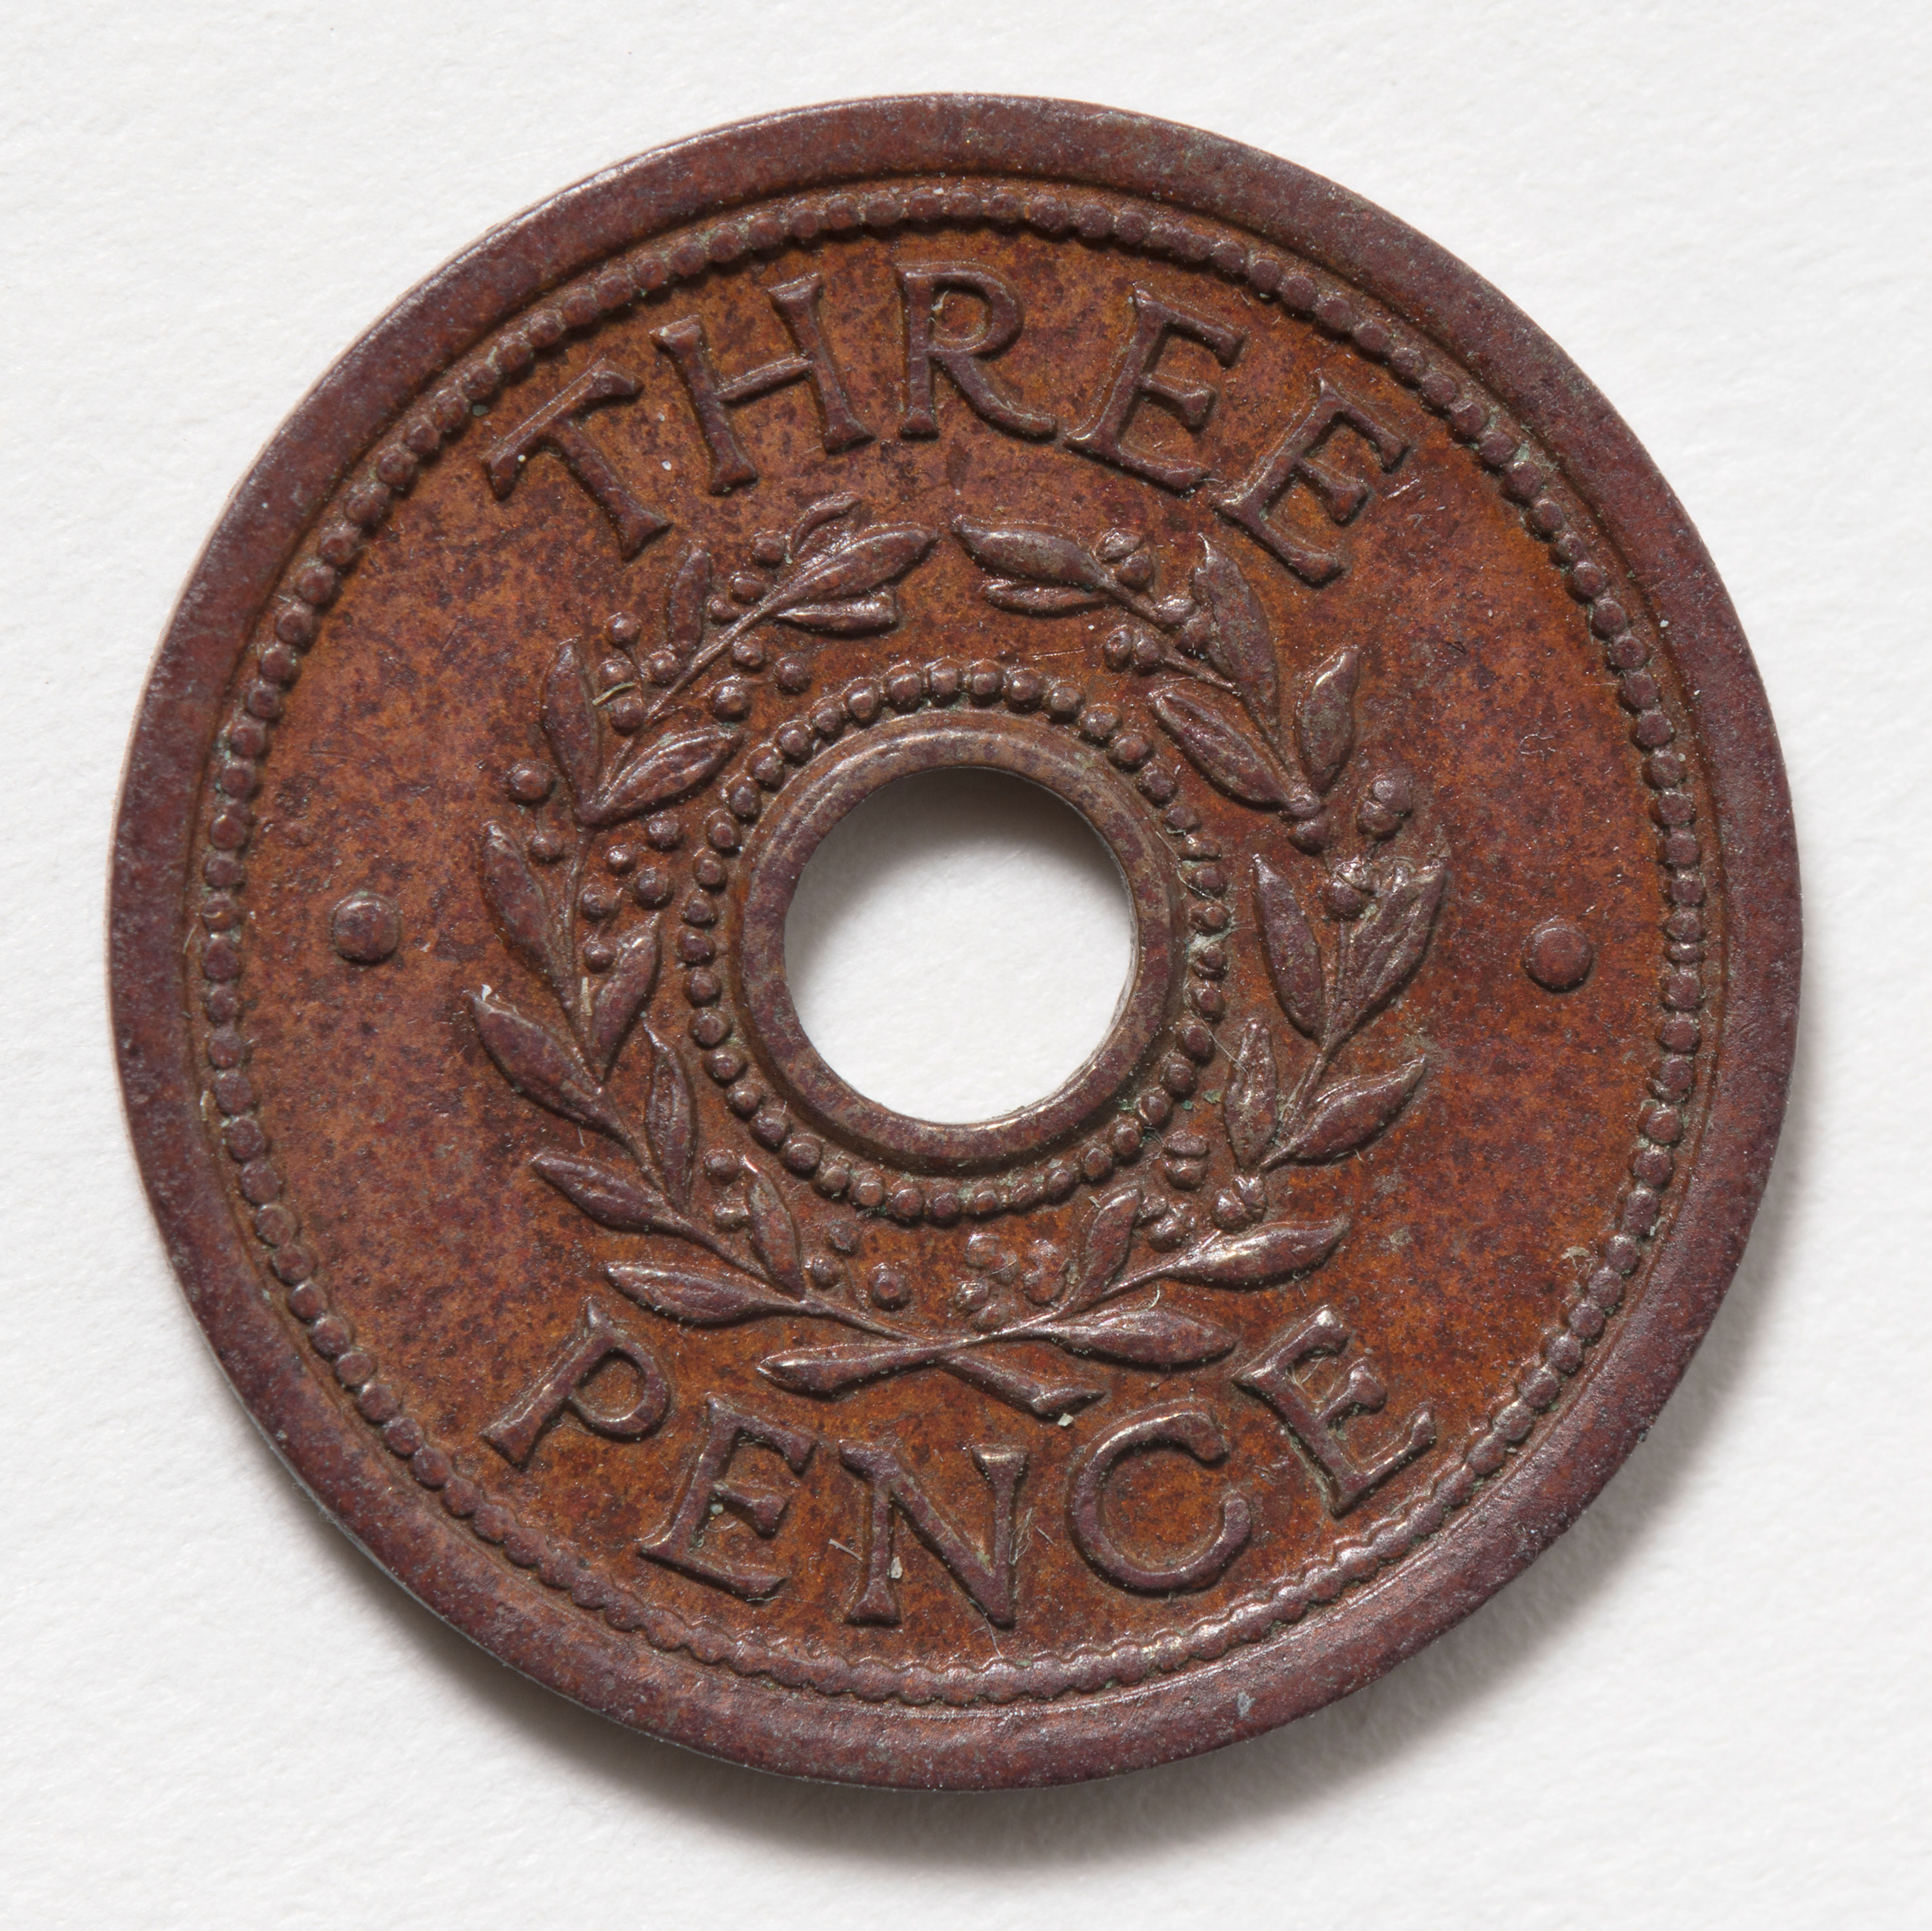 A brown old coin with the words three pence on the front. There is a hole in the middle of the coin with a wreath that goes around the hole. 